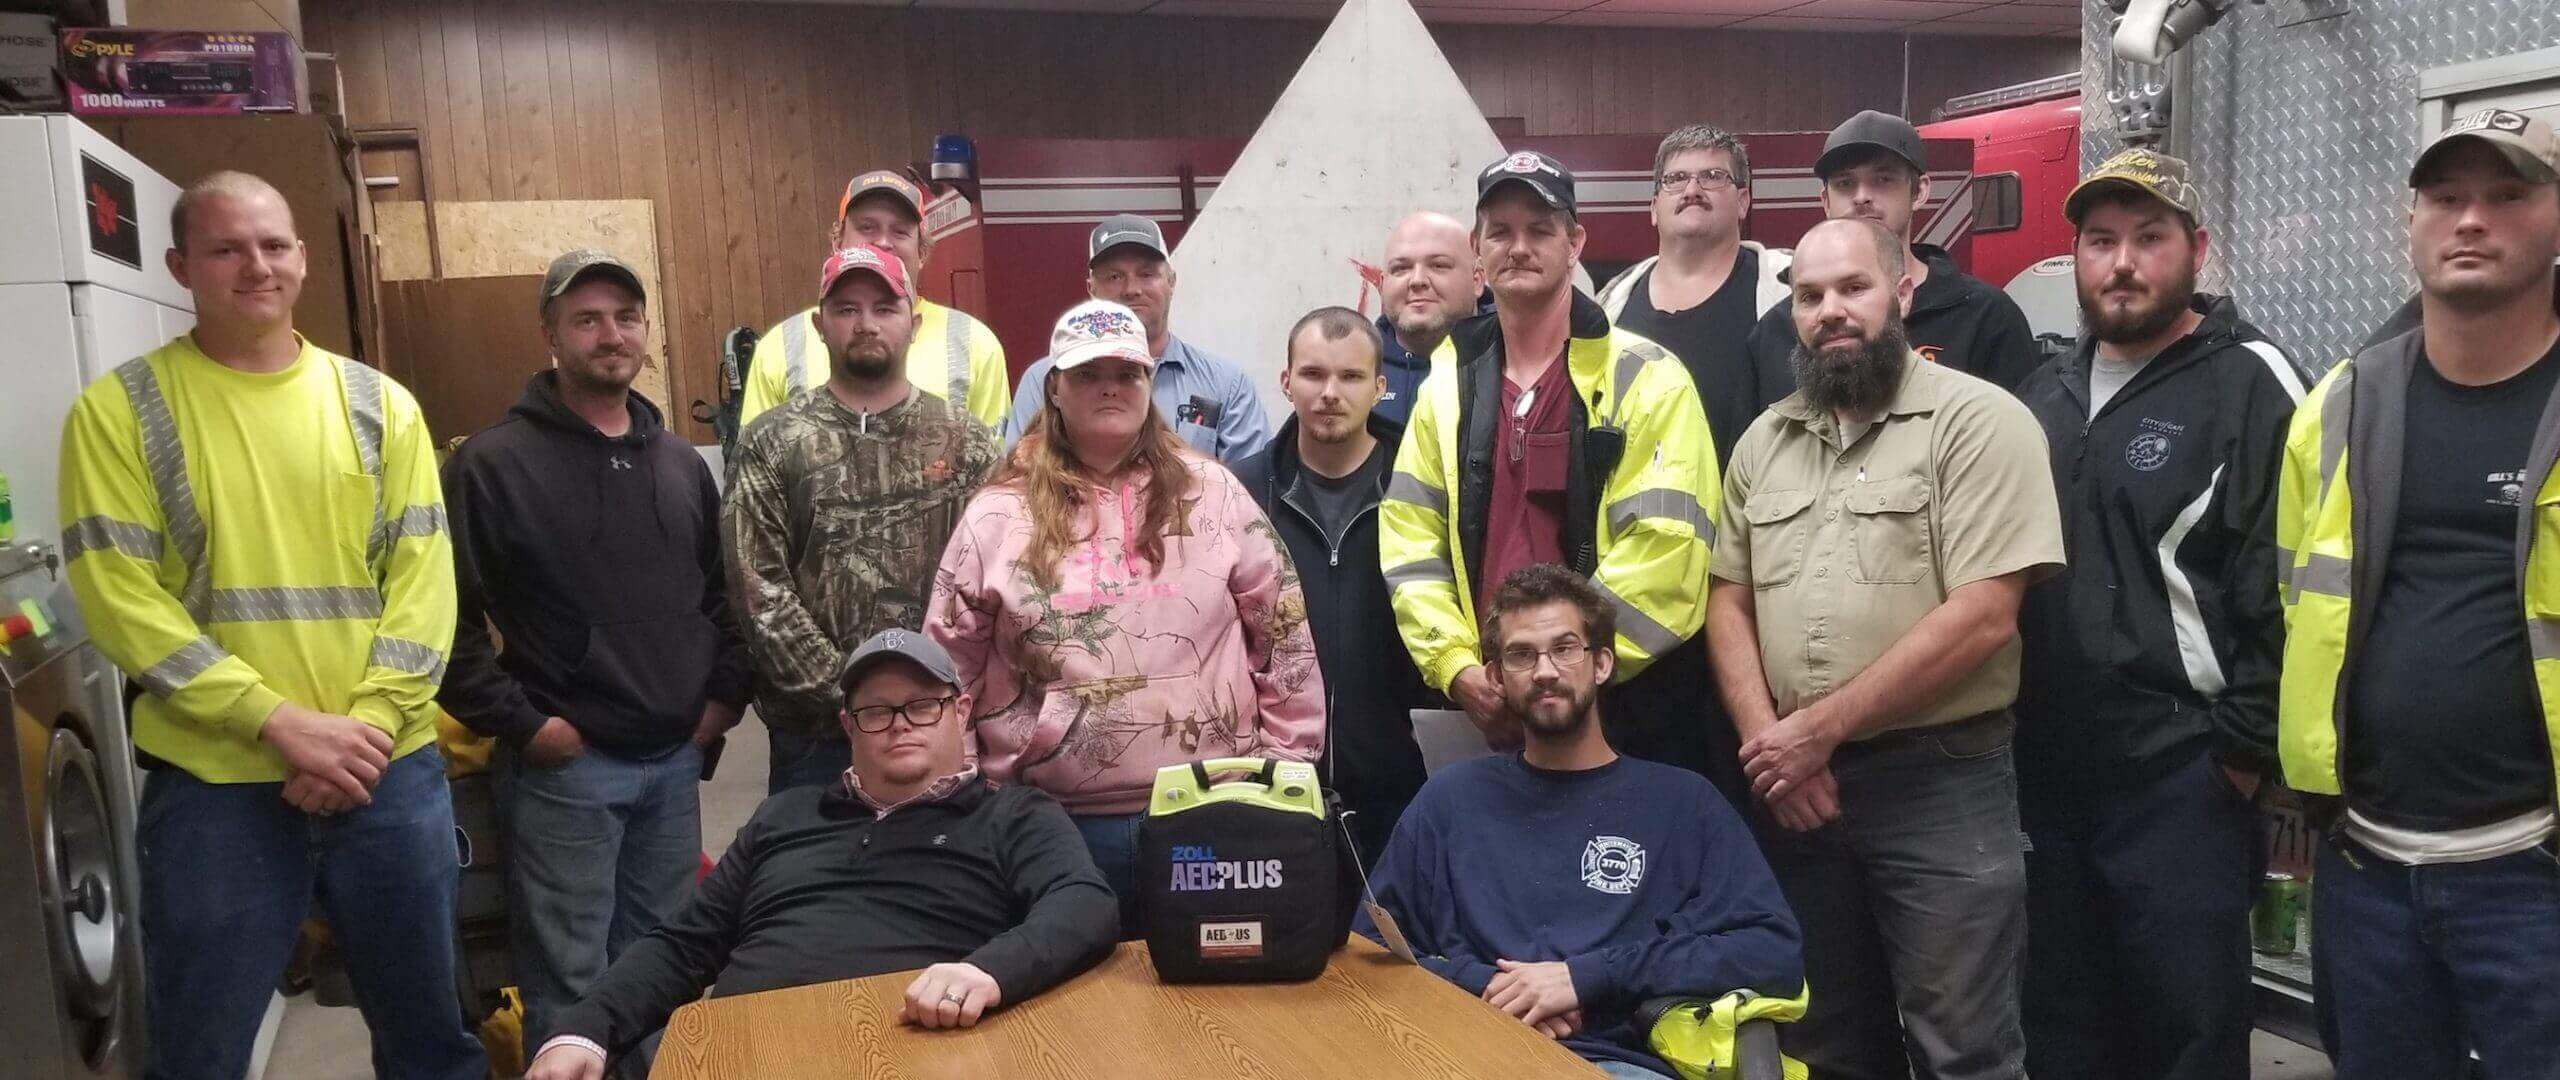 Whitewater Fire Protection District staff, AED.us giveaway winners